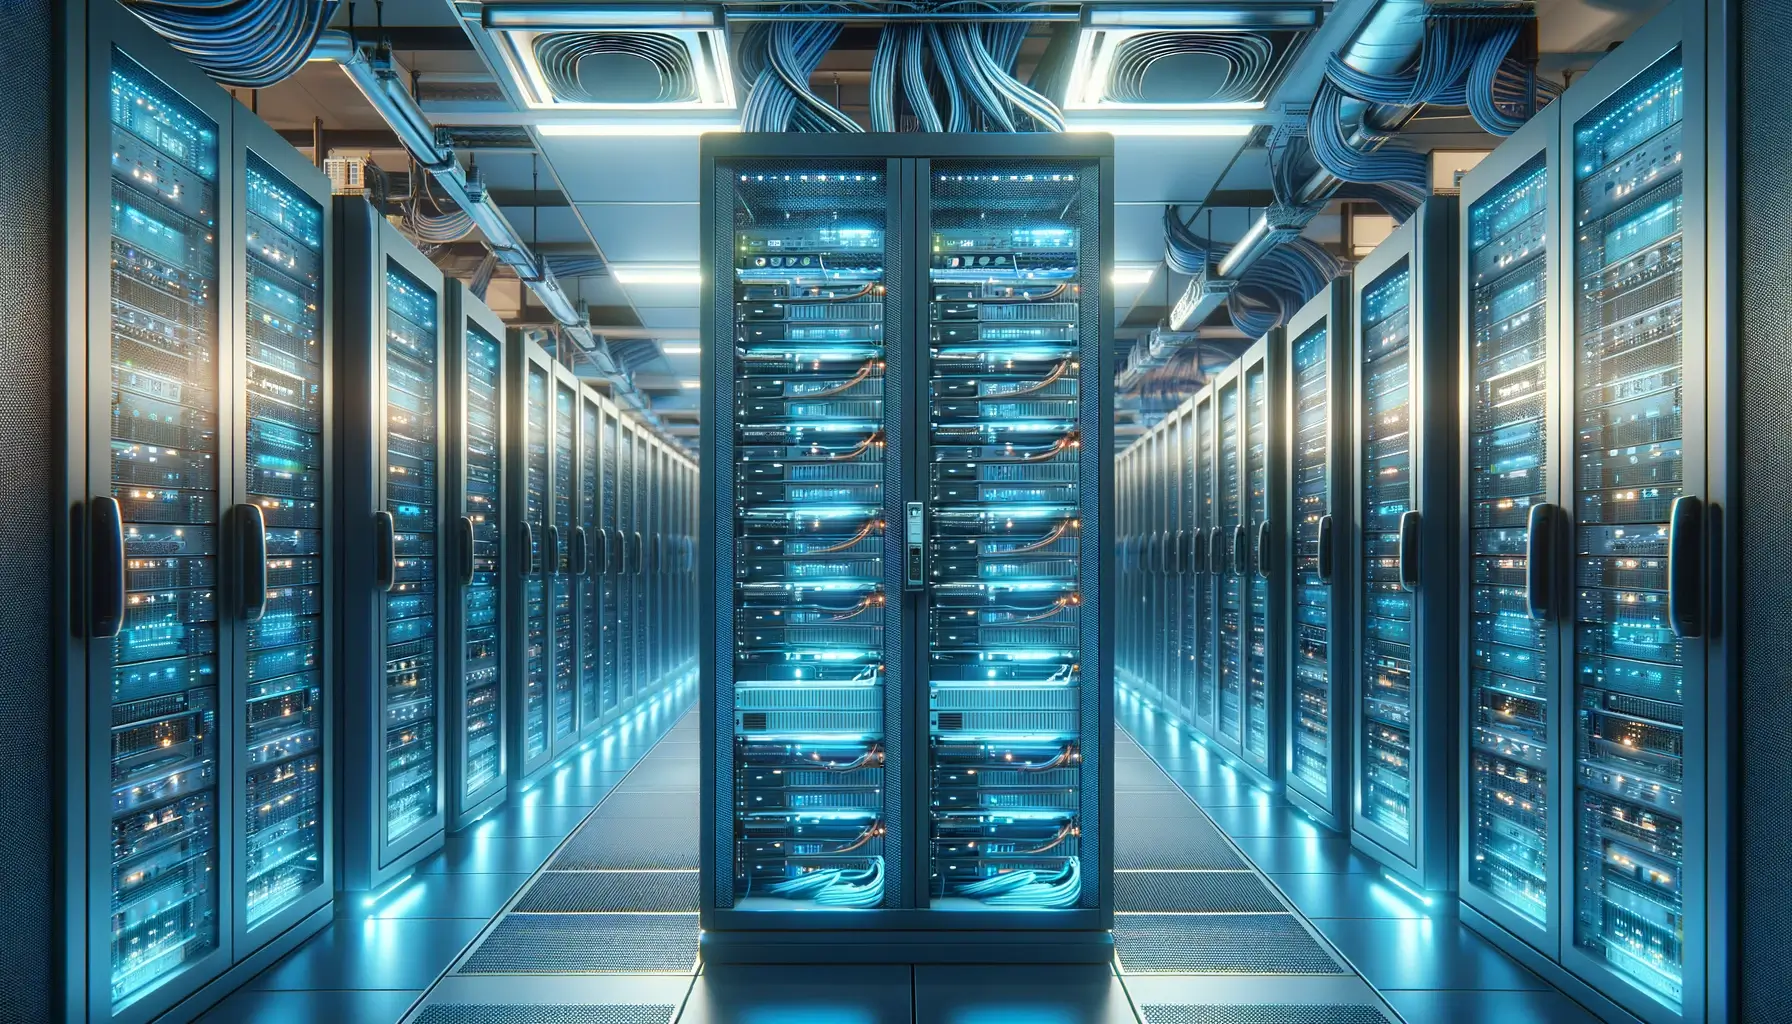 Illustration of the interior of a cloud server room